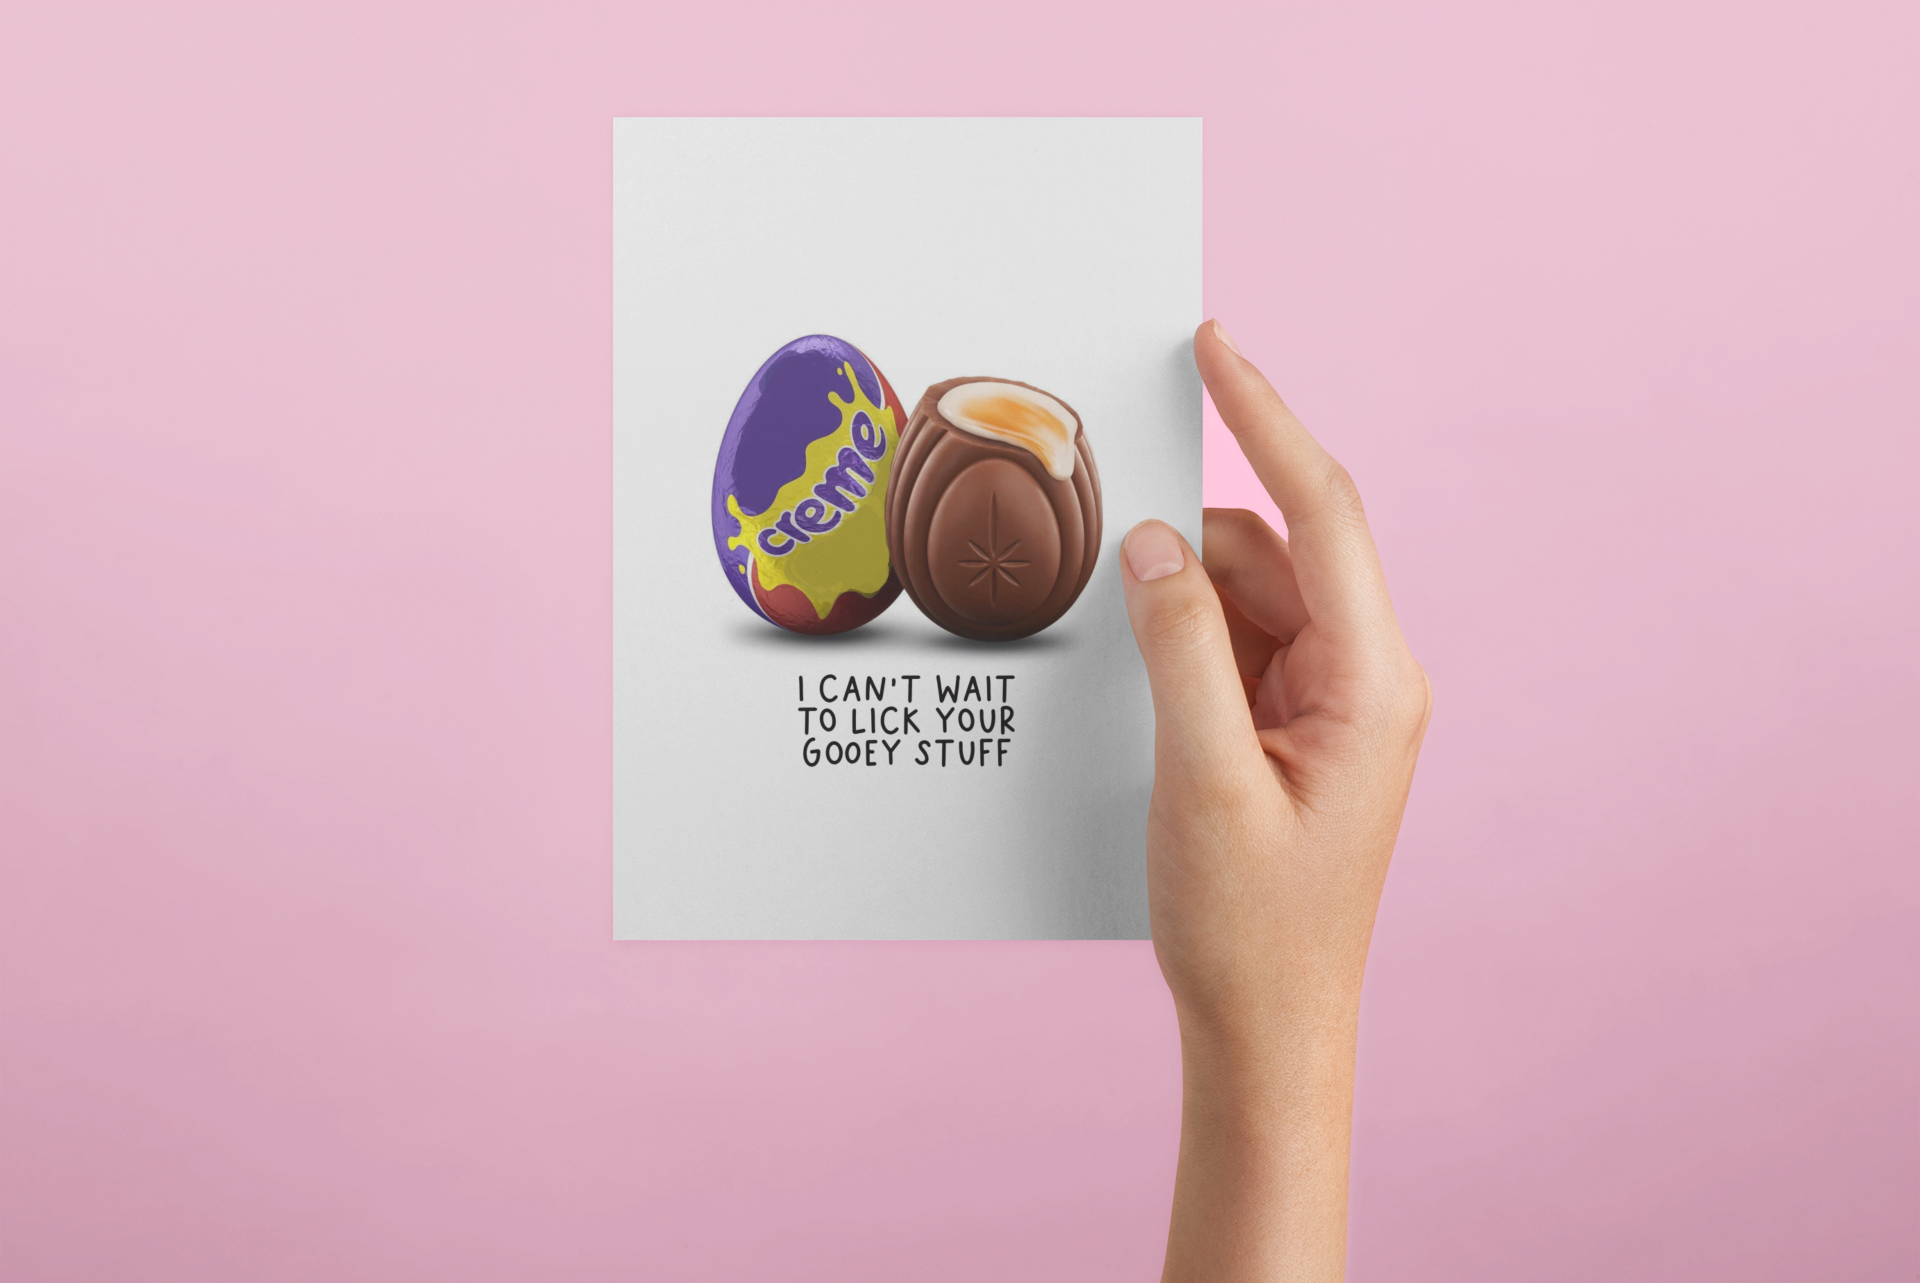 A fun greetings card with an image of a creme egg to the front and a quote underneath them which reads 'i can't wait to lick you out' .